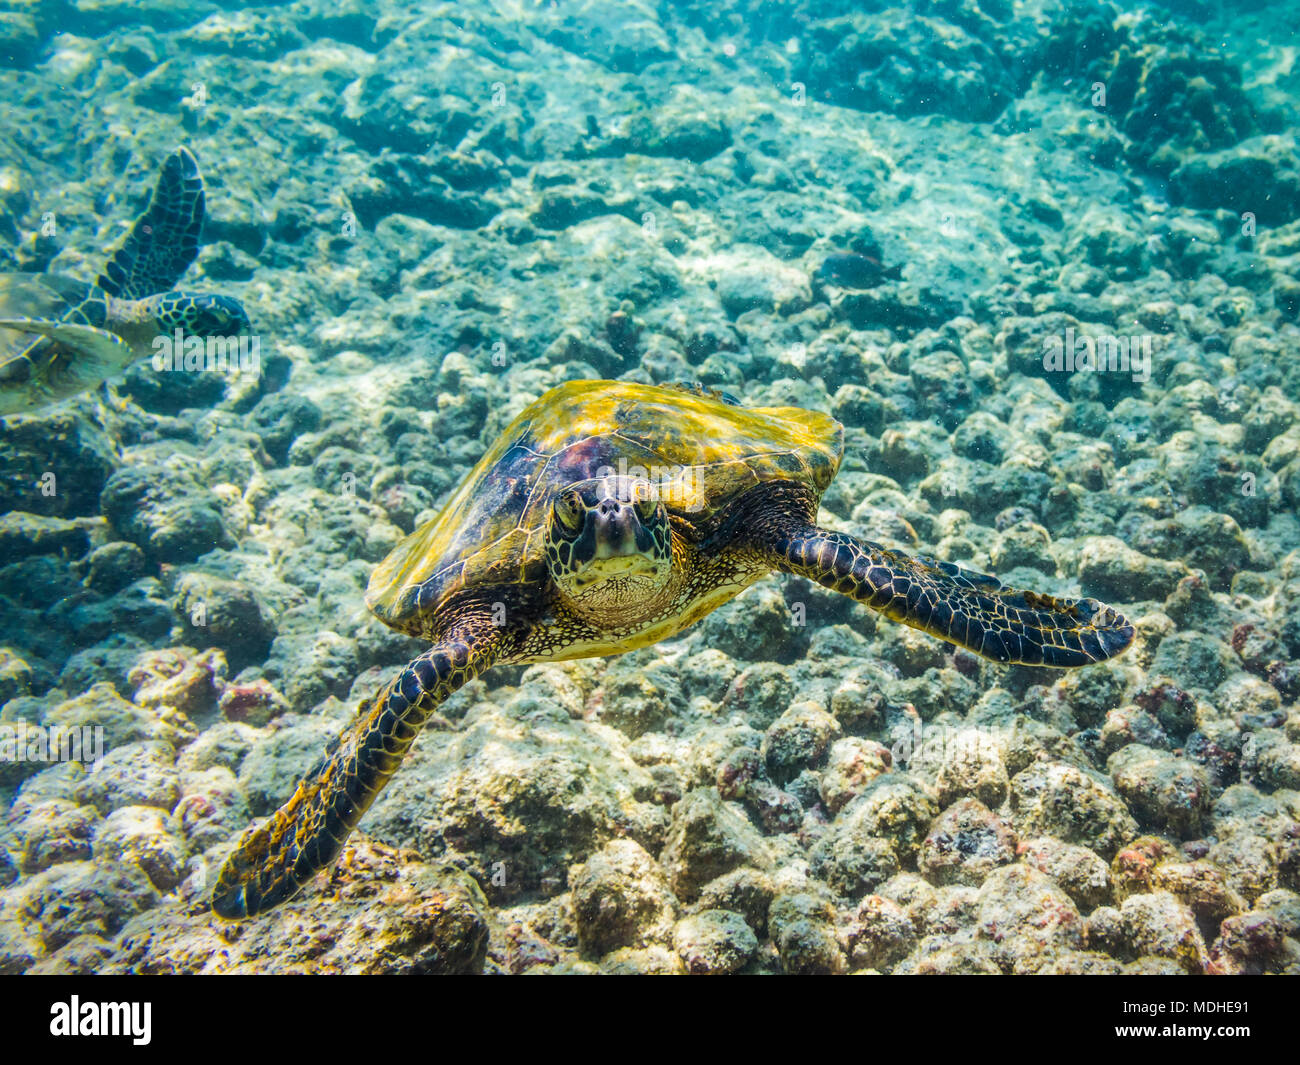 Green Sea Turtles (Chelonia mydas) searching for food, photographed while snorkelling along the Kona coast; Island of Hawaii, United States of America Stock Photo